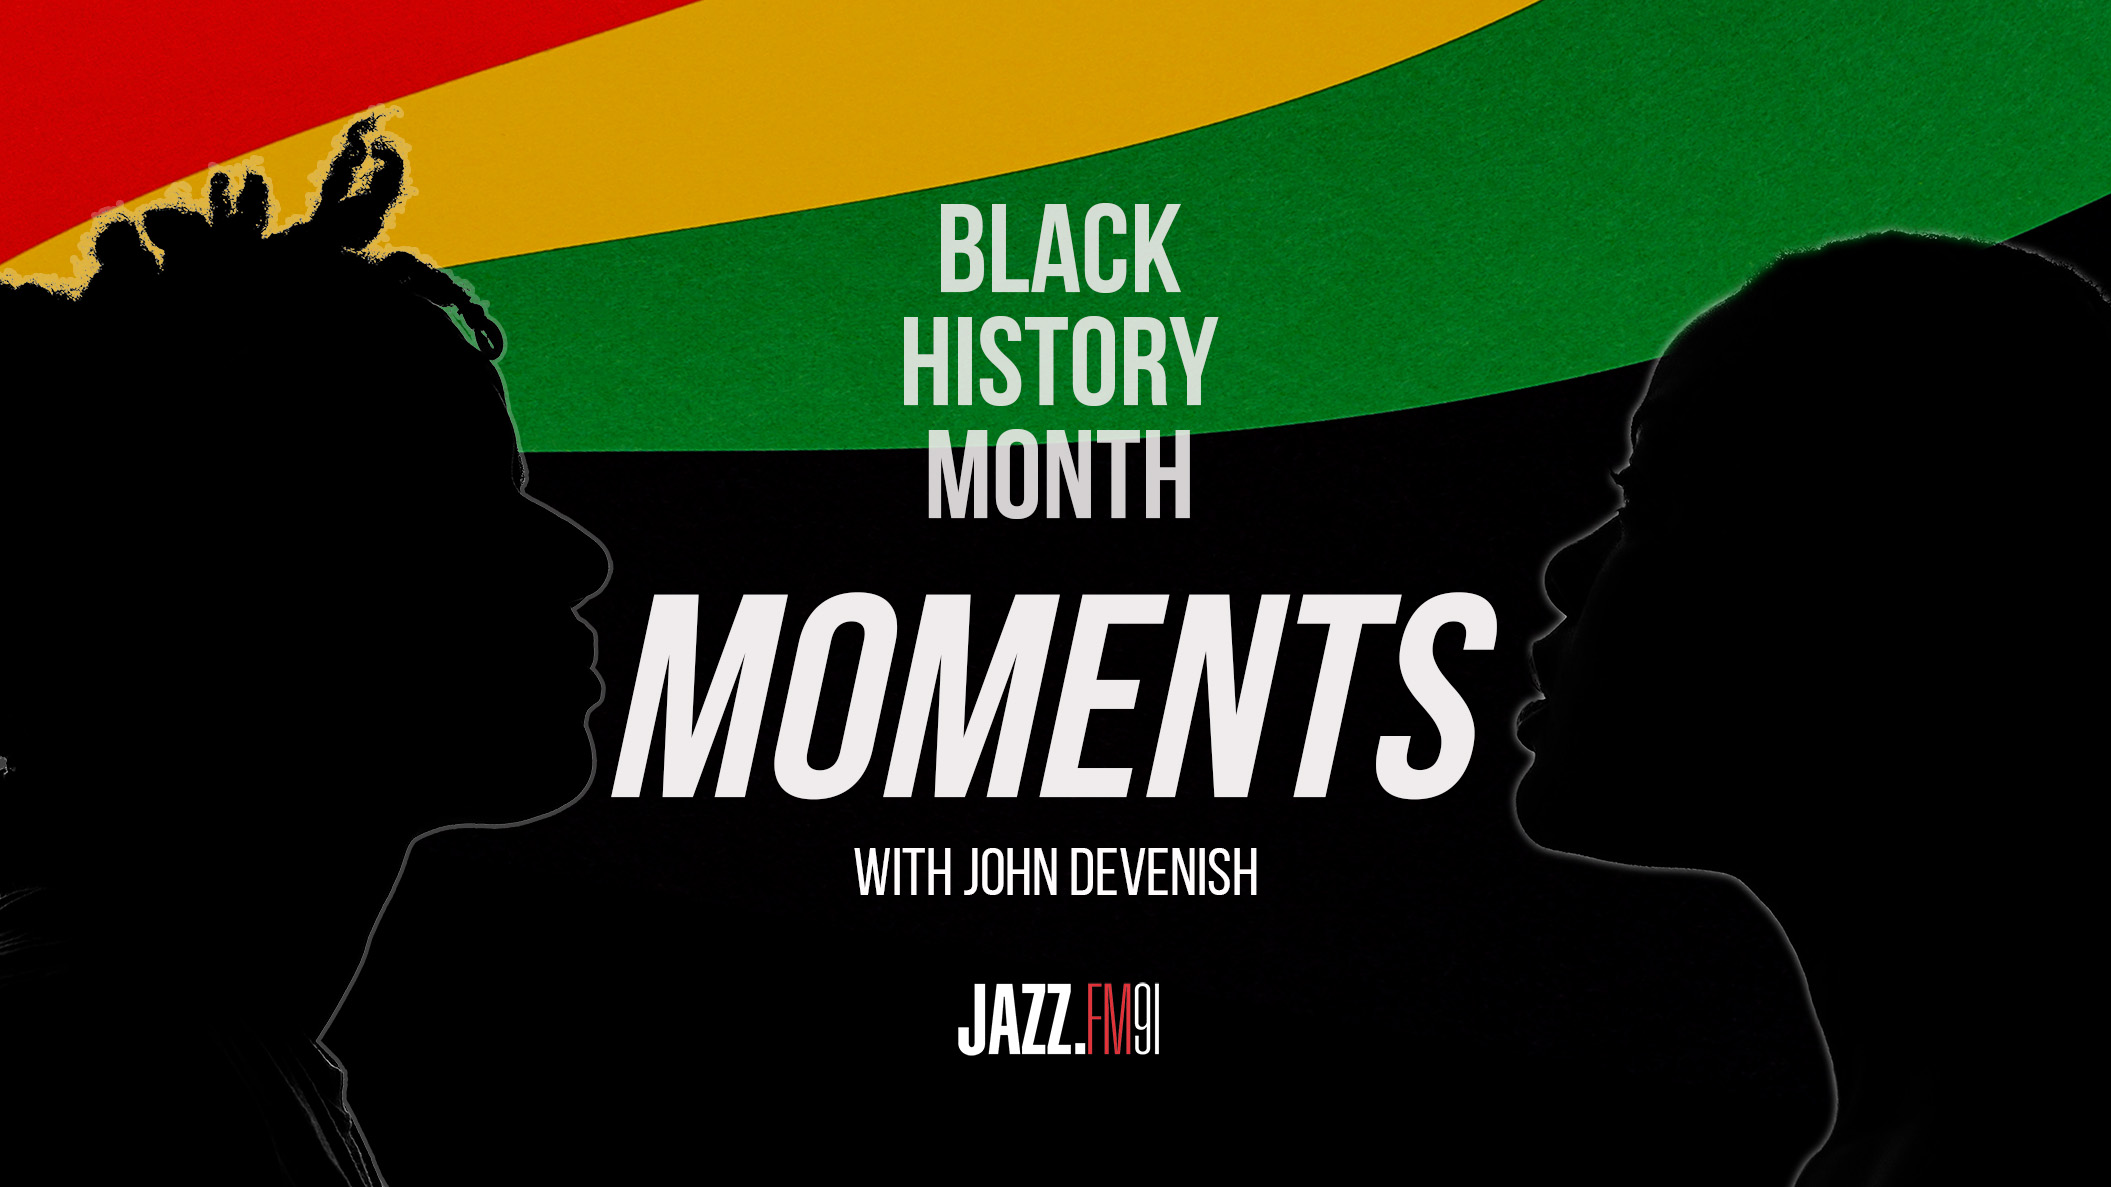 Black History Month: Moments